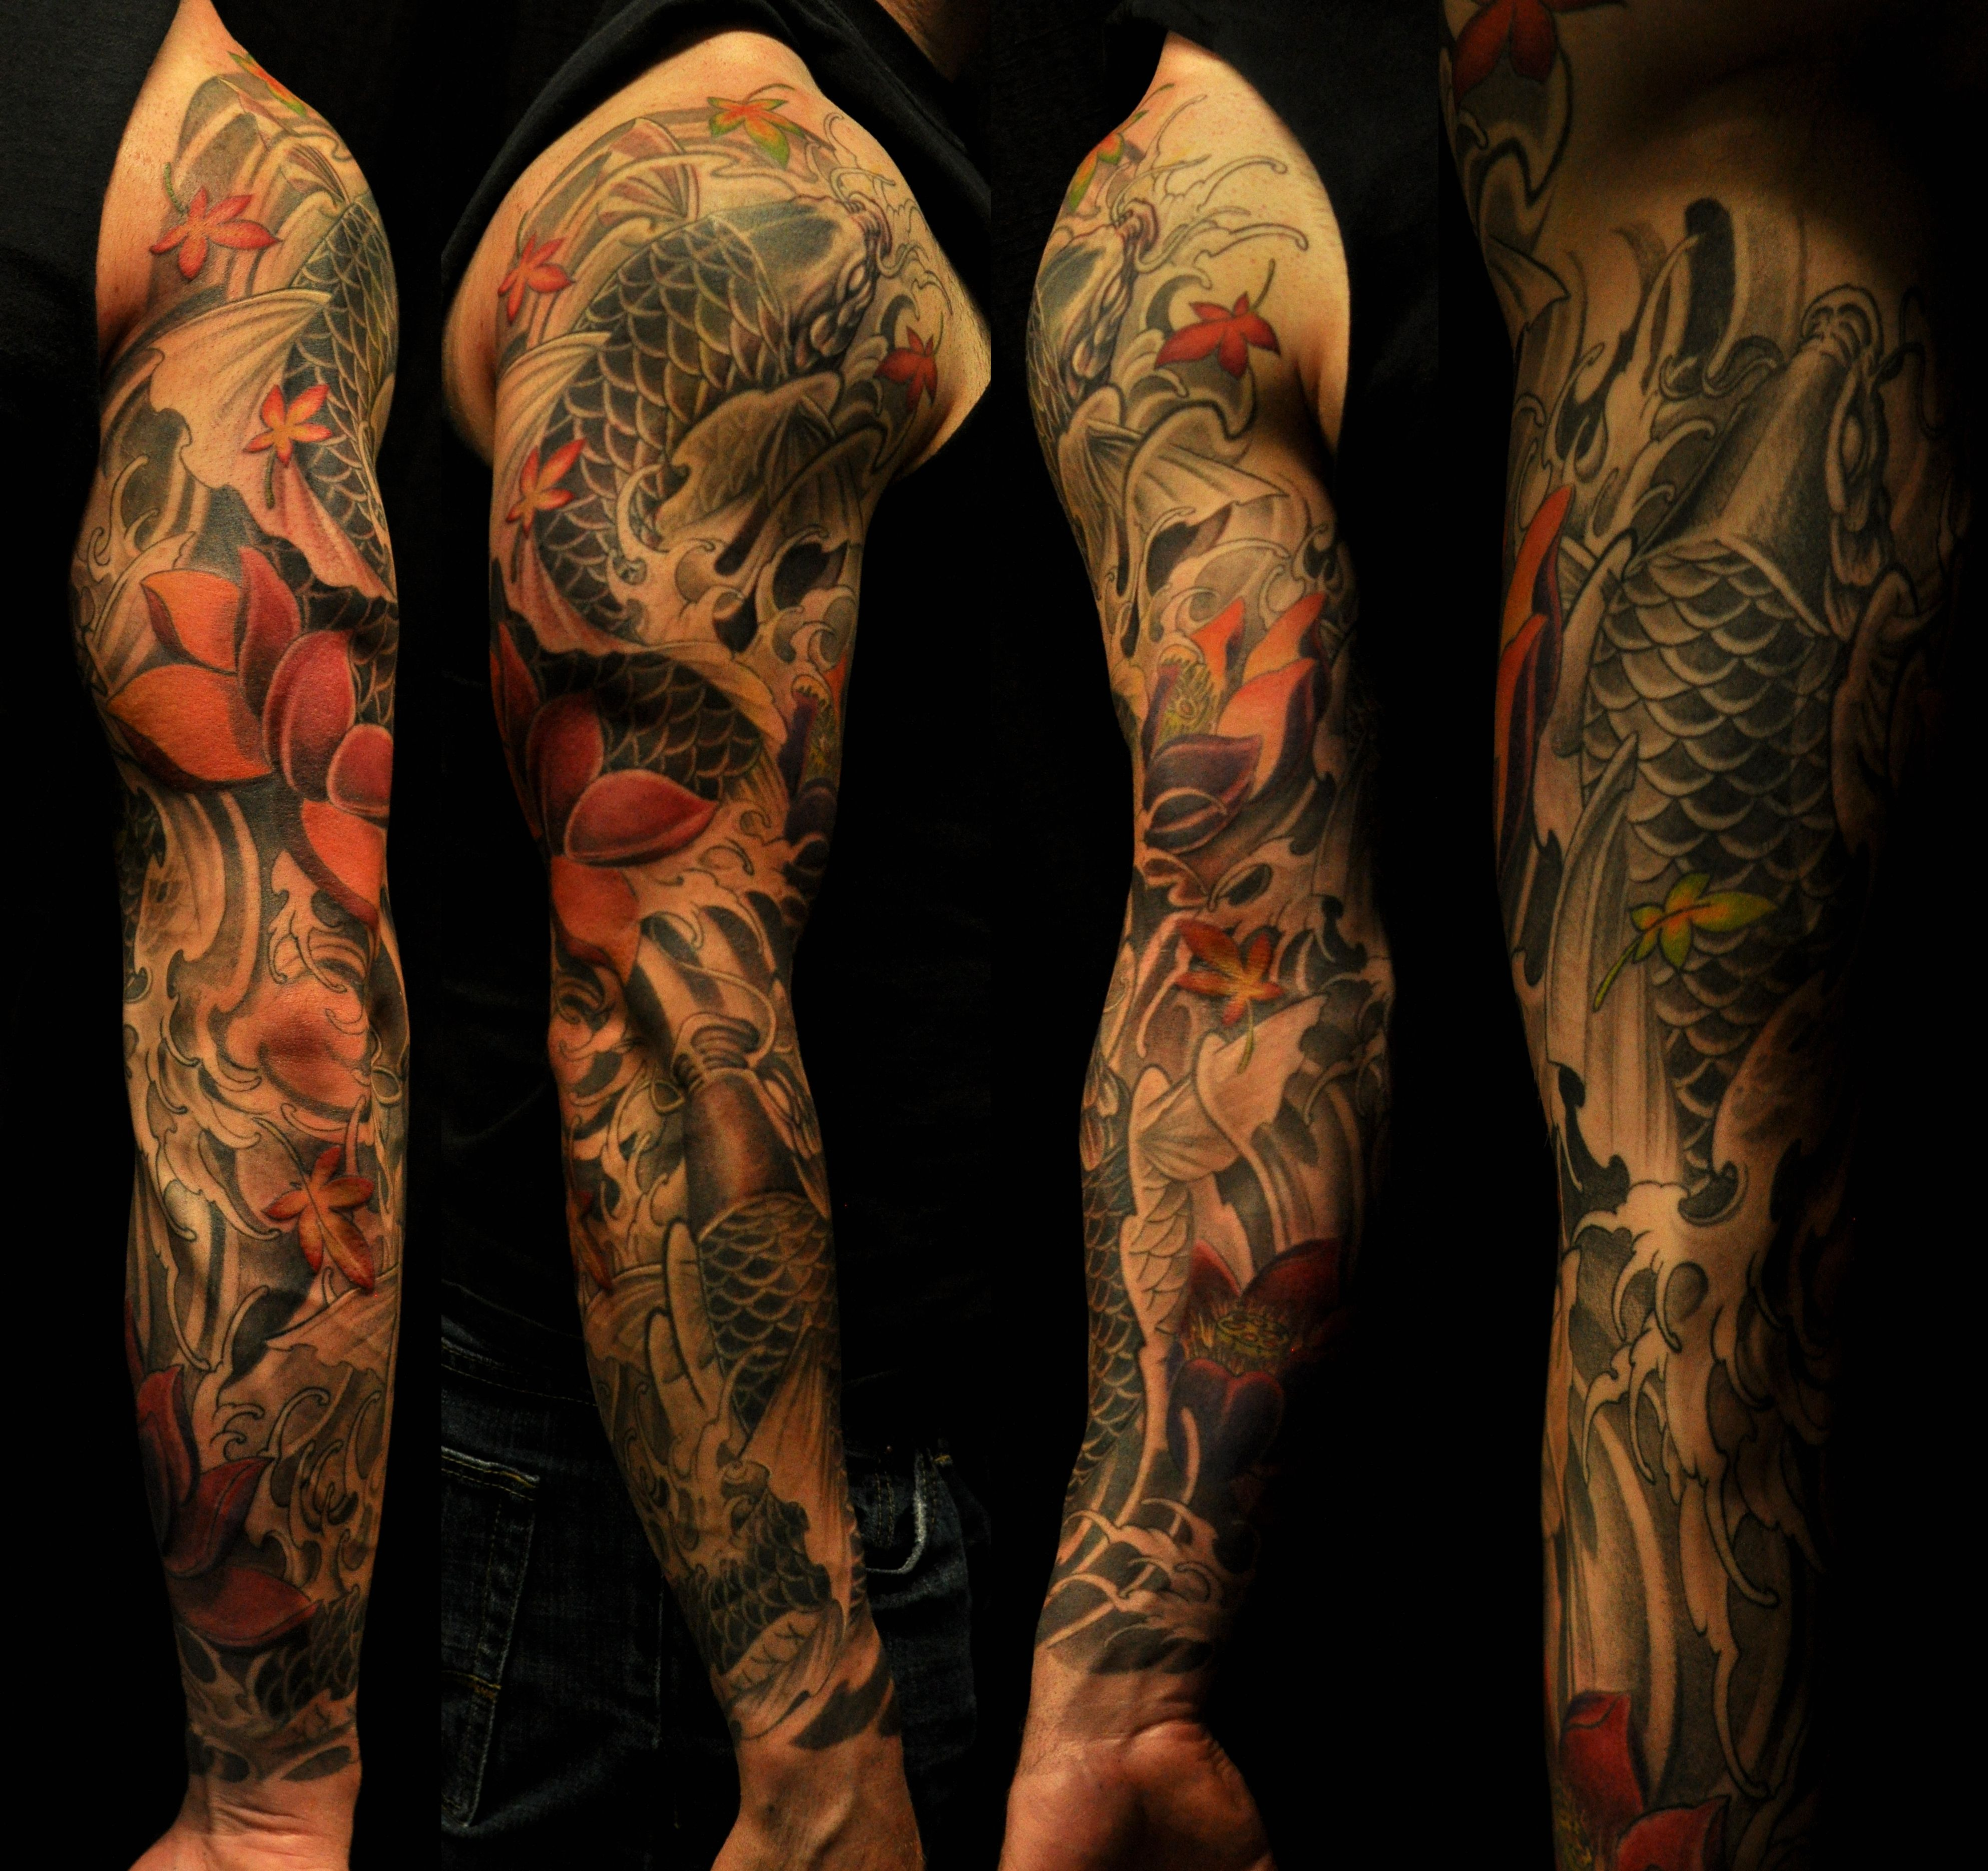 Koi Fish Tattoo Sleeve Black And Grey Nyaduts Pictures To Pin On regarding measurements 3972 X 3738